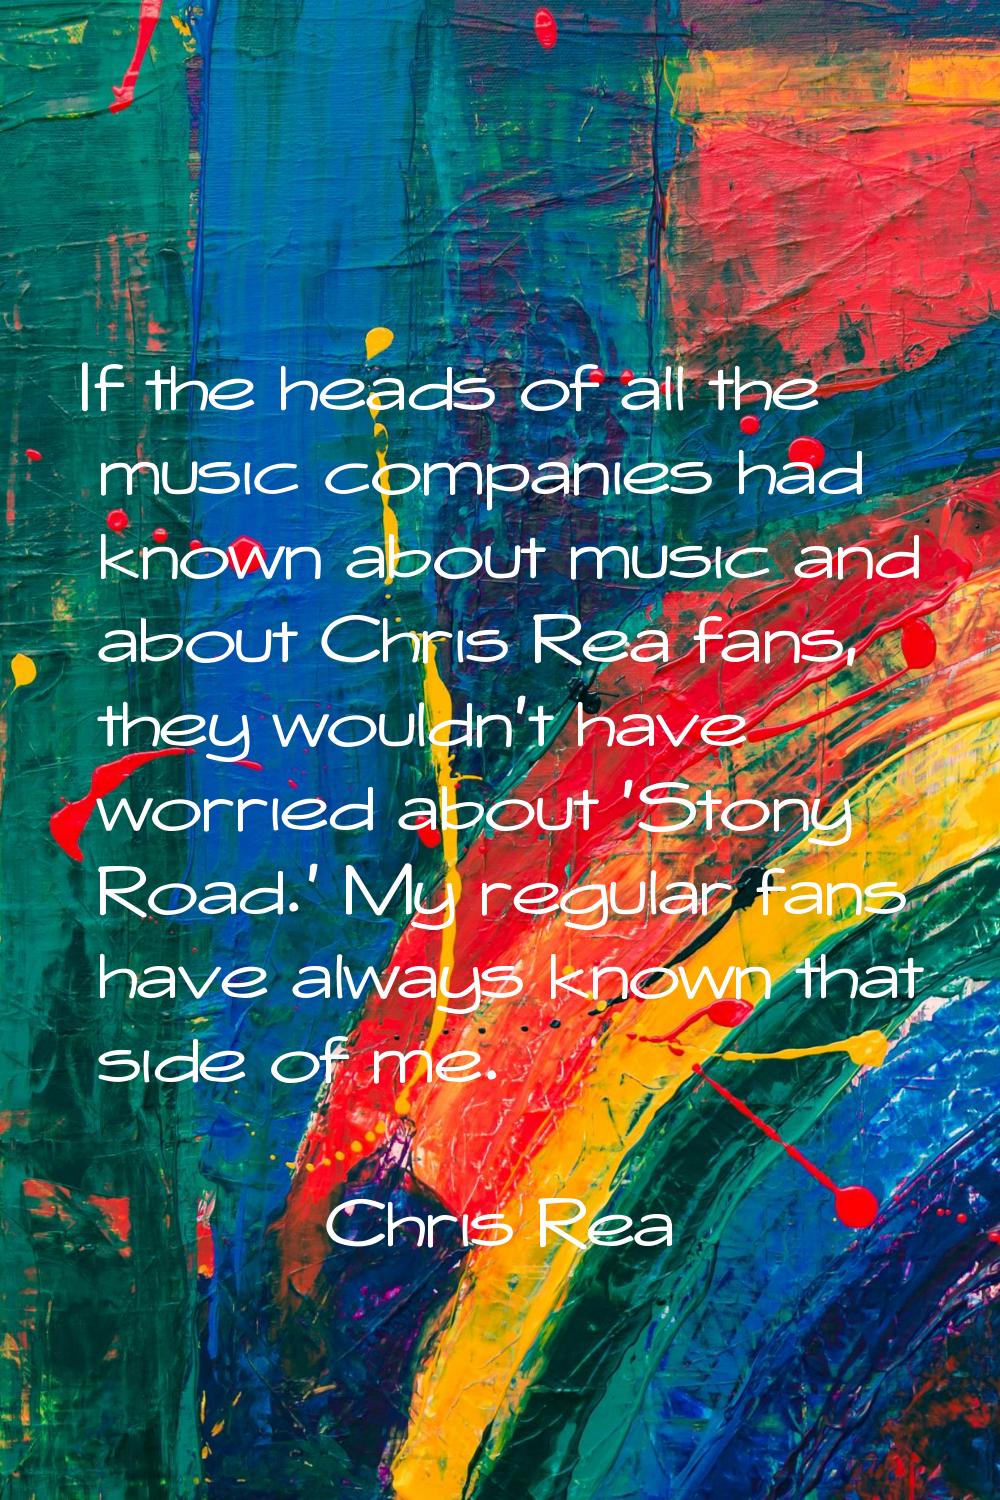 If the heads of all the music companies had known about music and about Chris Rea fans, they wouldn